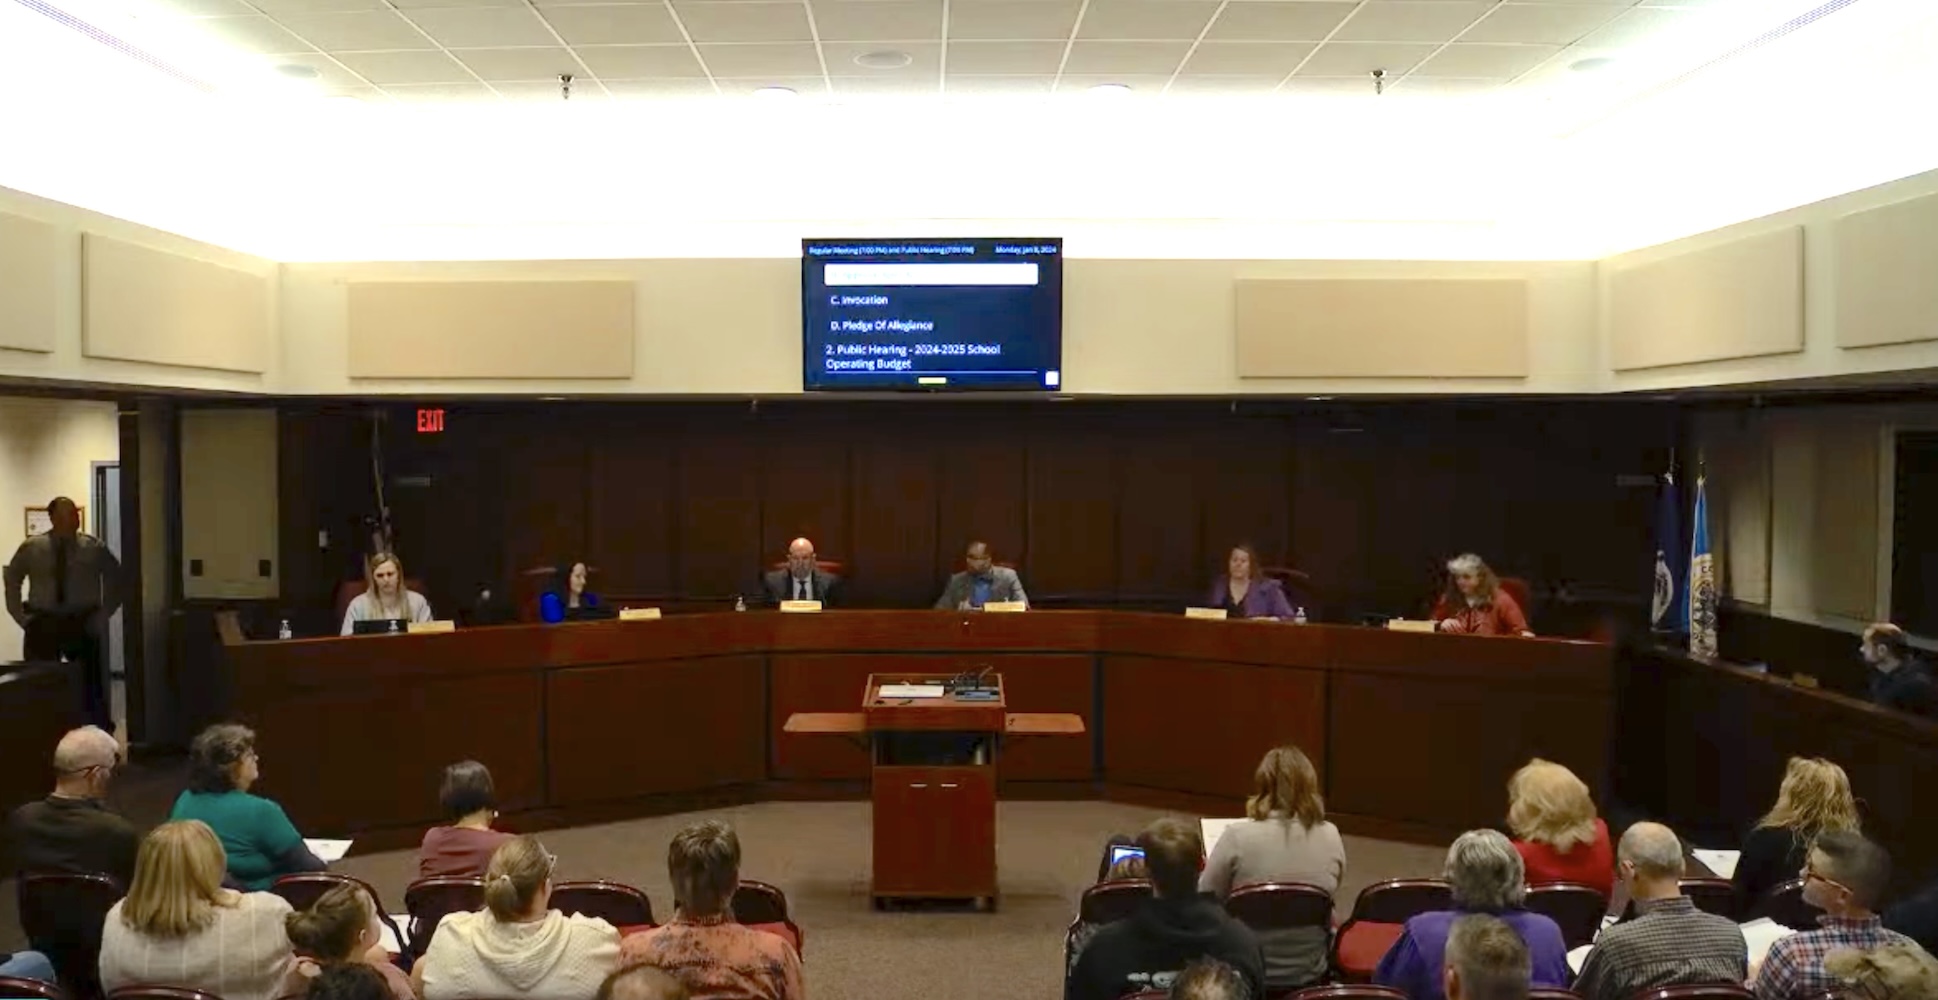 Prayer at school board meeting sparks Constitutional debate - The Lion